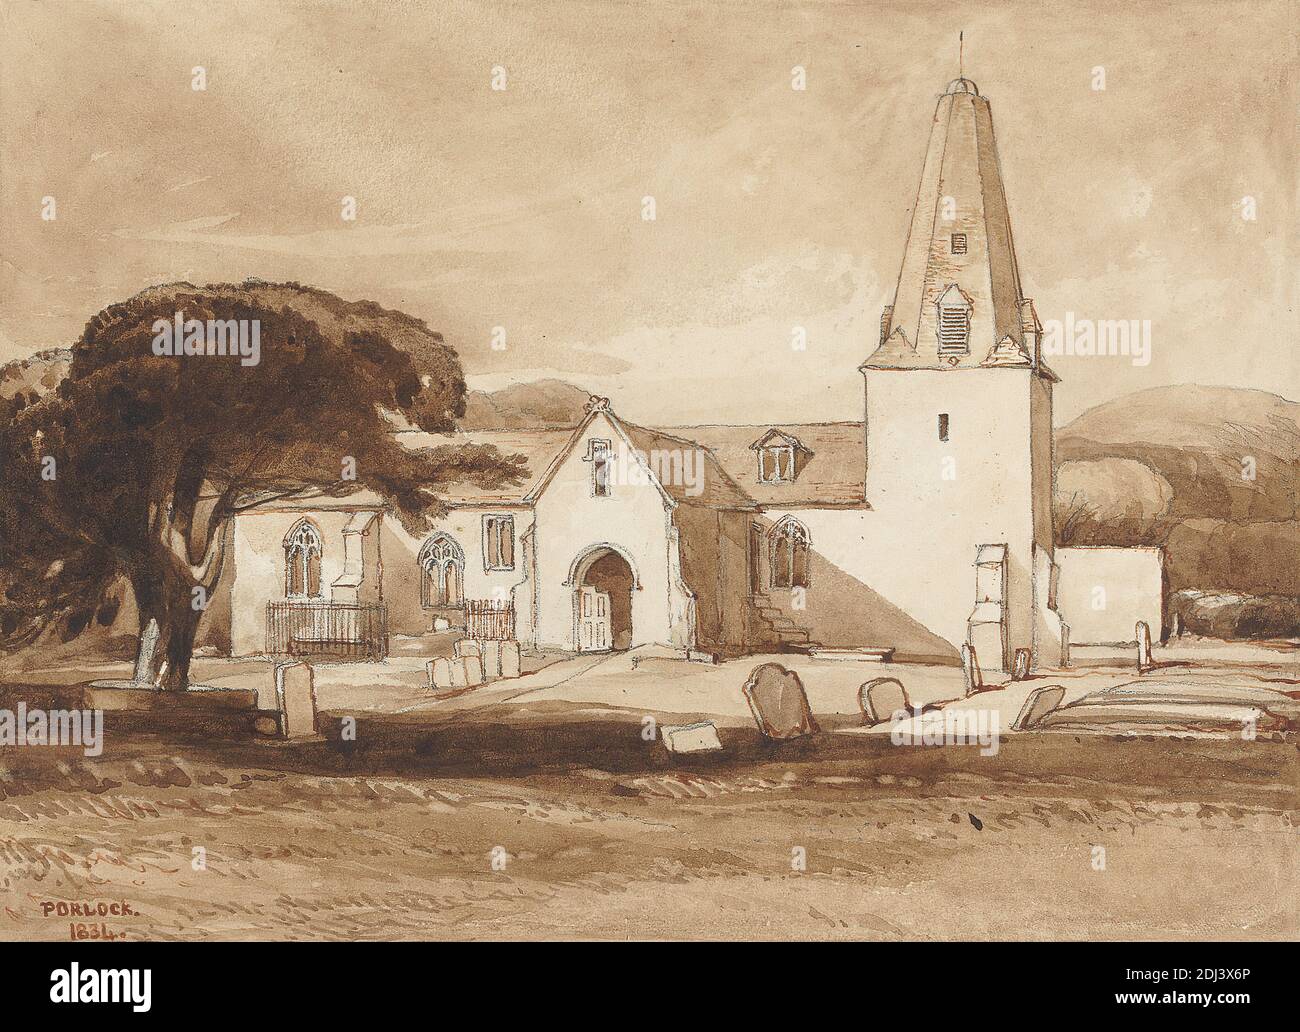 One from A Volume of Drawings and Prints, Rev. James Bulwer, 1794–1879, British, 1834, Graphite, pen and brown ink, brown wash on smooth, moderately thick, cream wove paper, Sheet: 13 1/4 × 17 inches (33.7 × 43.2 cm) and Image: 5 1/2 × 7 5/8 inches (14 × 19.4 cm Stock Photo